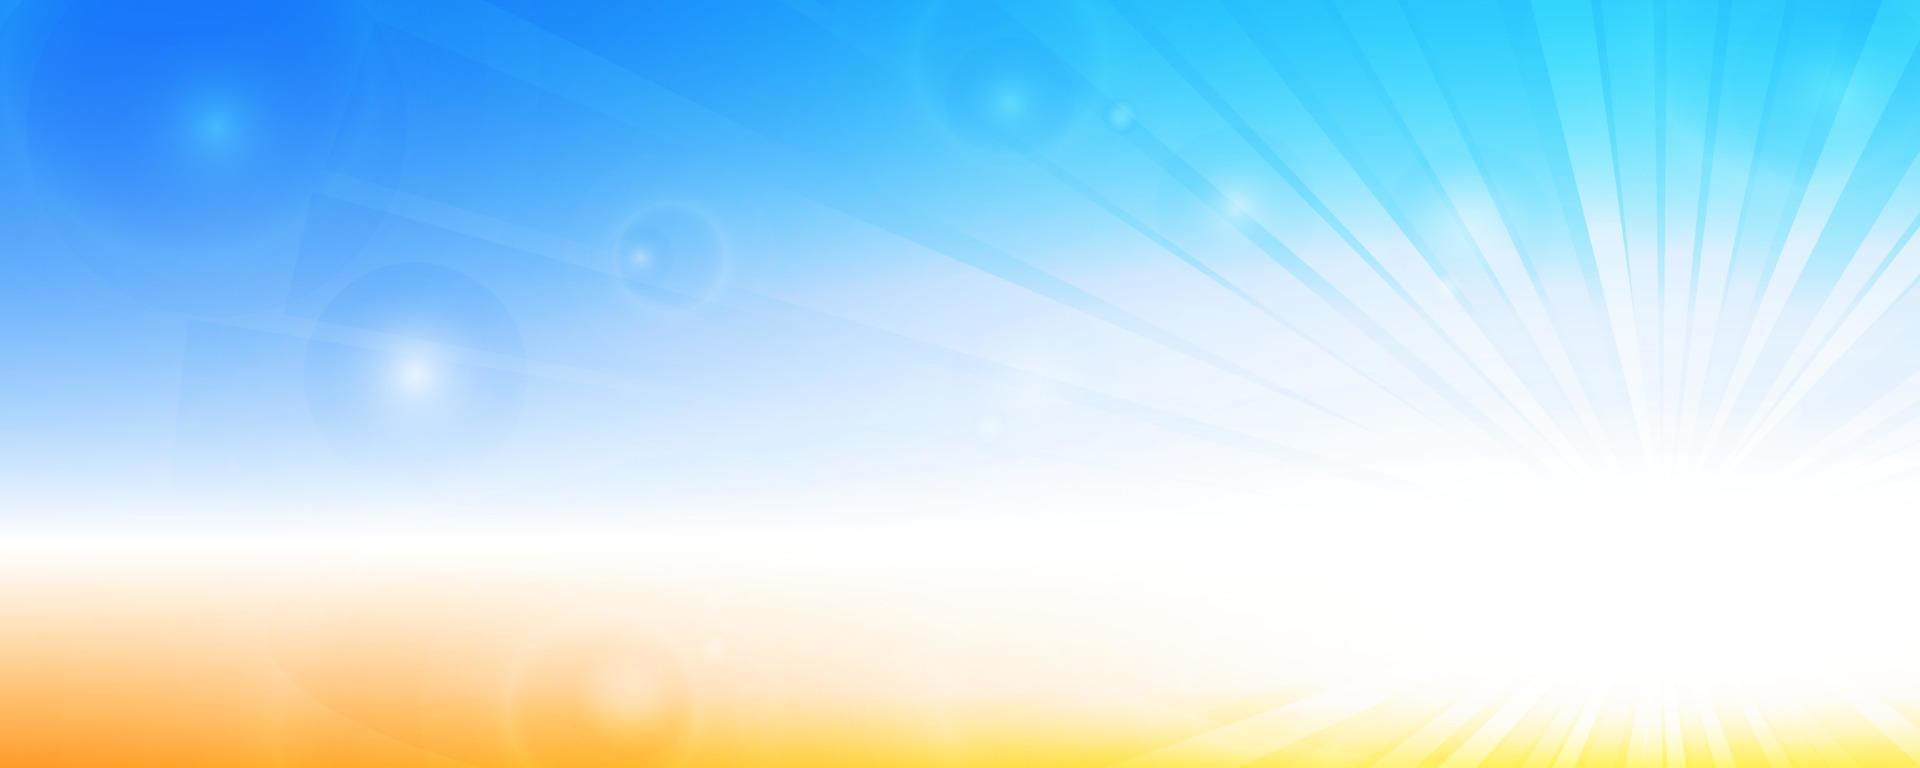 Abstract summer banner design with shiny sun lights vector